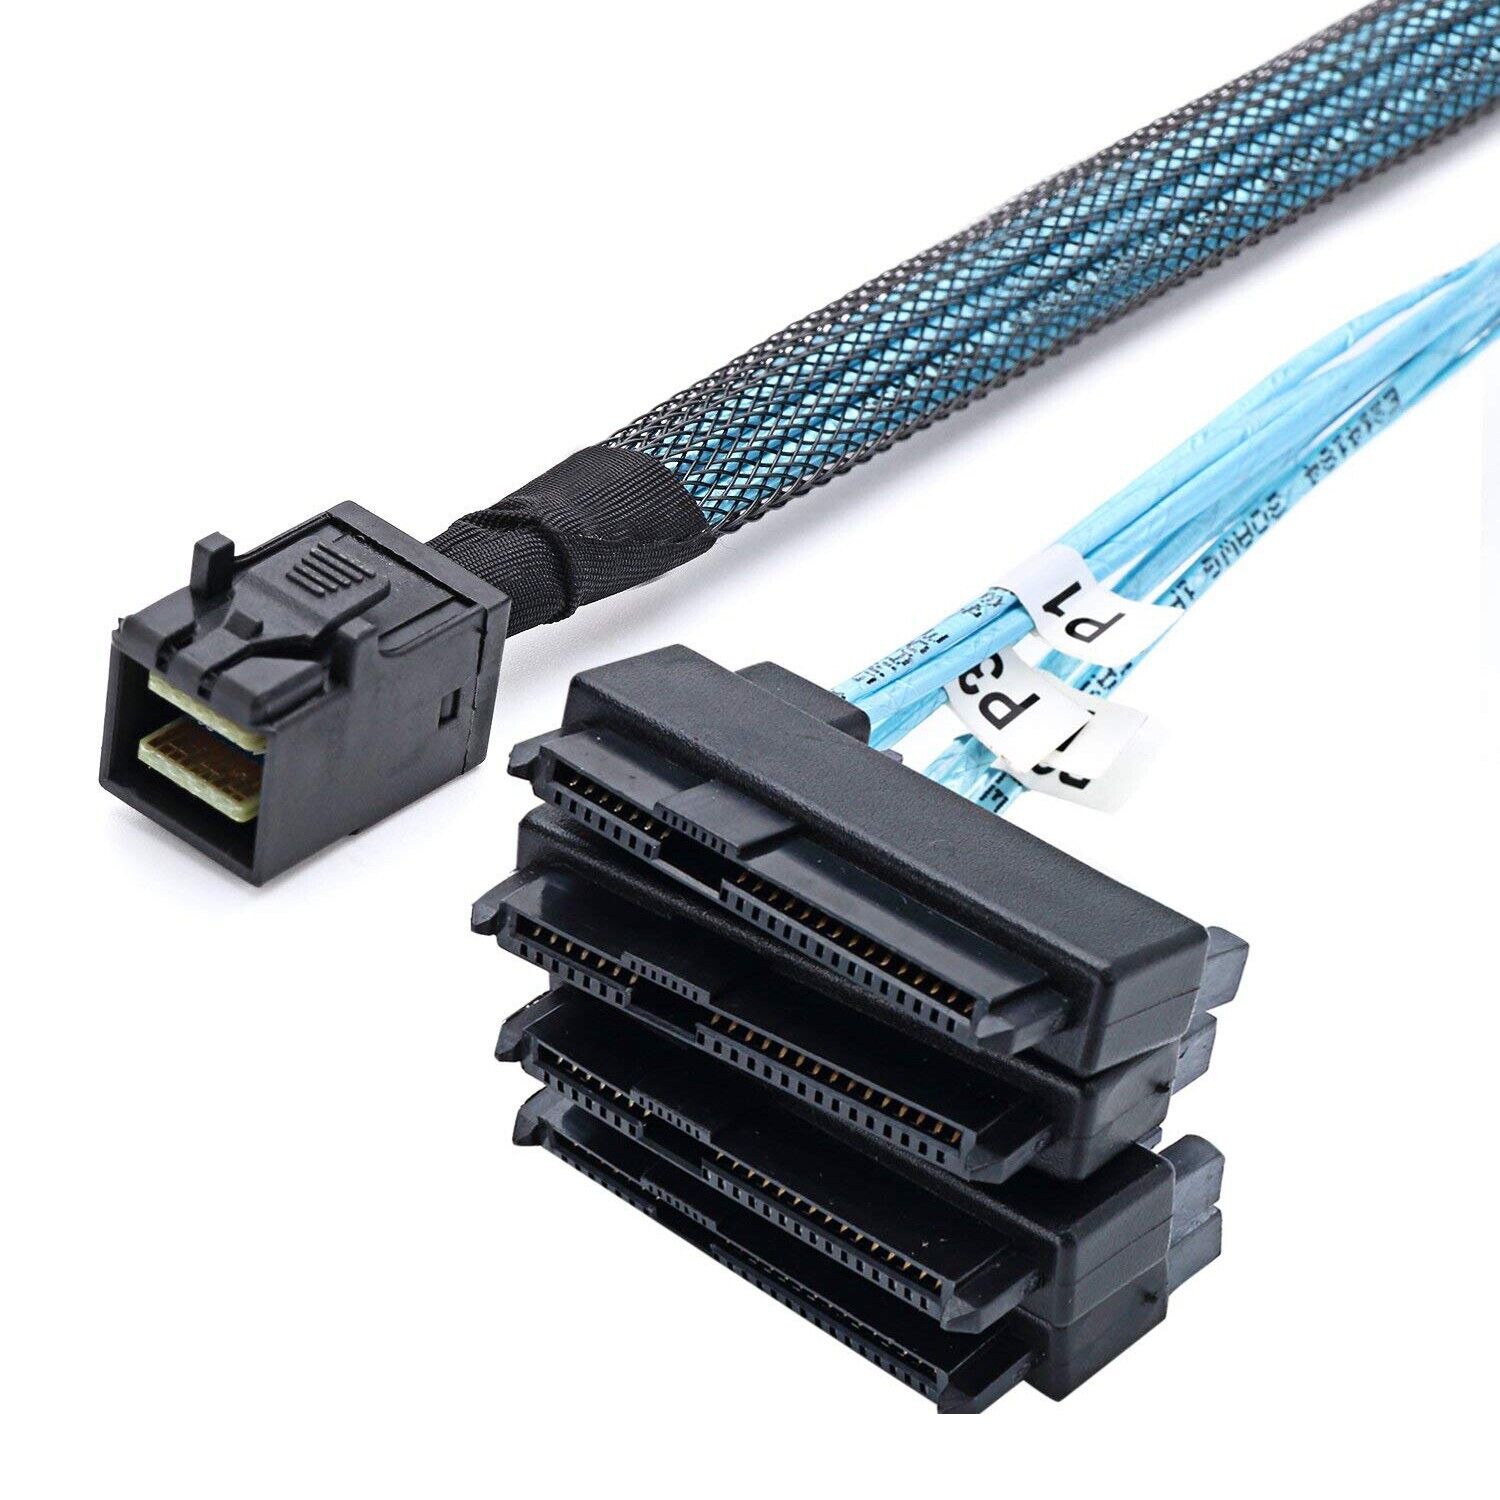 P82C Mini SAS SFF-8643 On 4x 29pin SFF-8482 And 4x SATA 15pin Splitter Cable